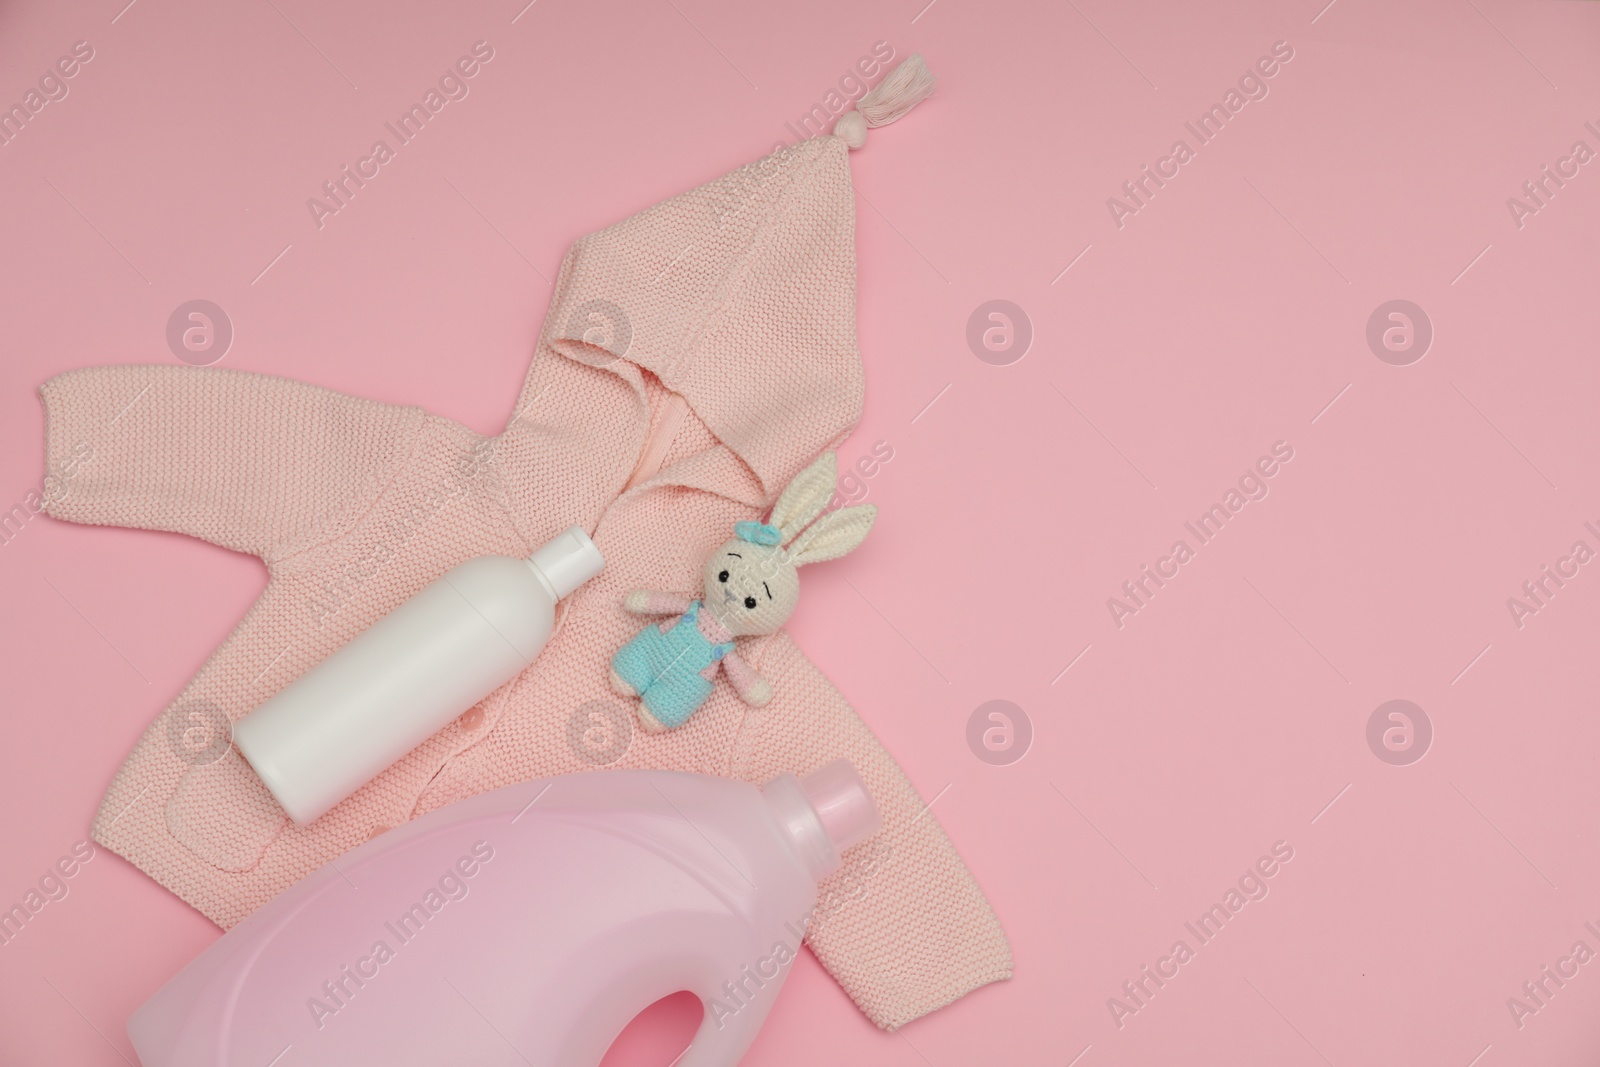 Photo of Bottles of laundry detergents, baby sweatshirt and toy bunny on pink background, flat lay. Space for text